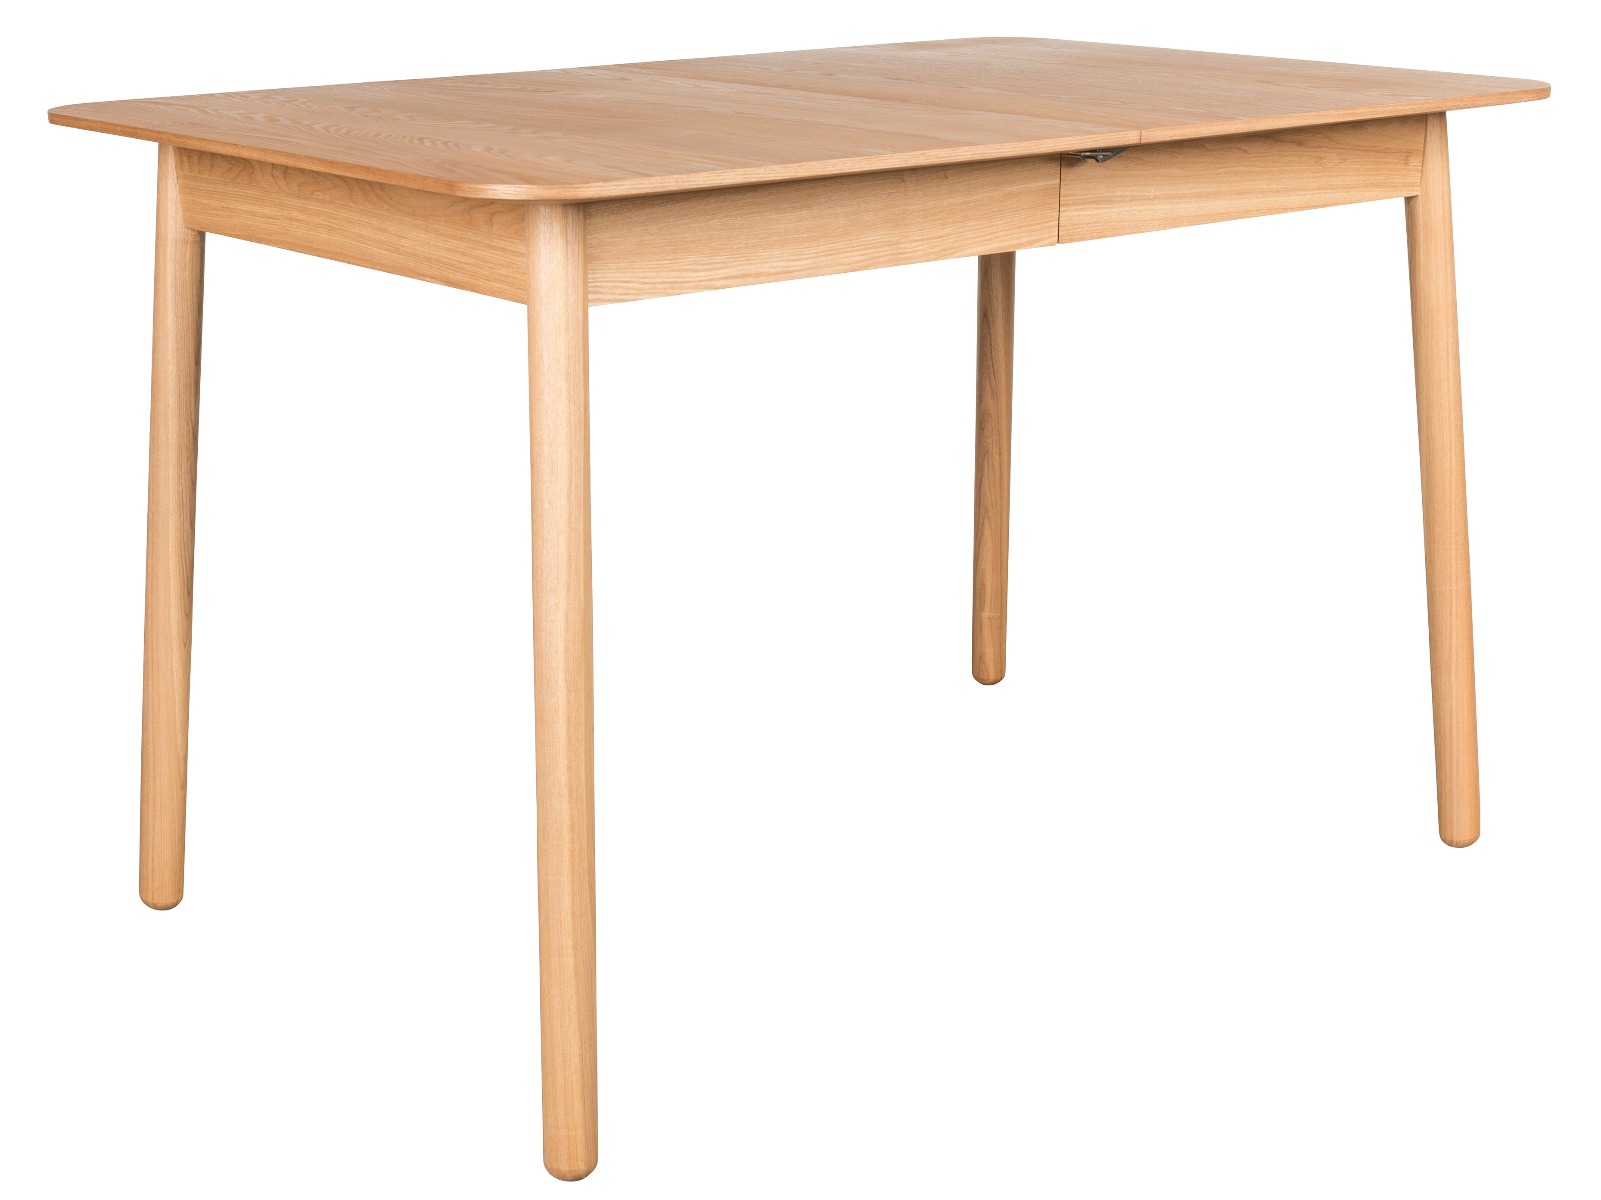 Glimps Extendable Dining Table in Natural